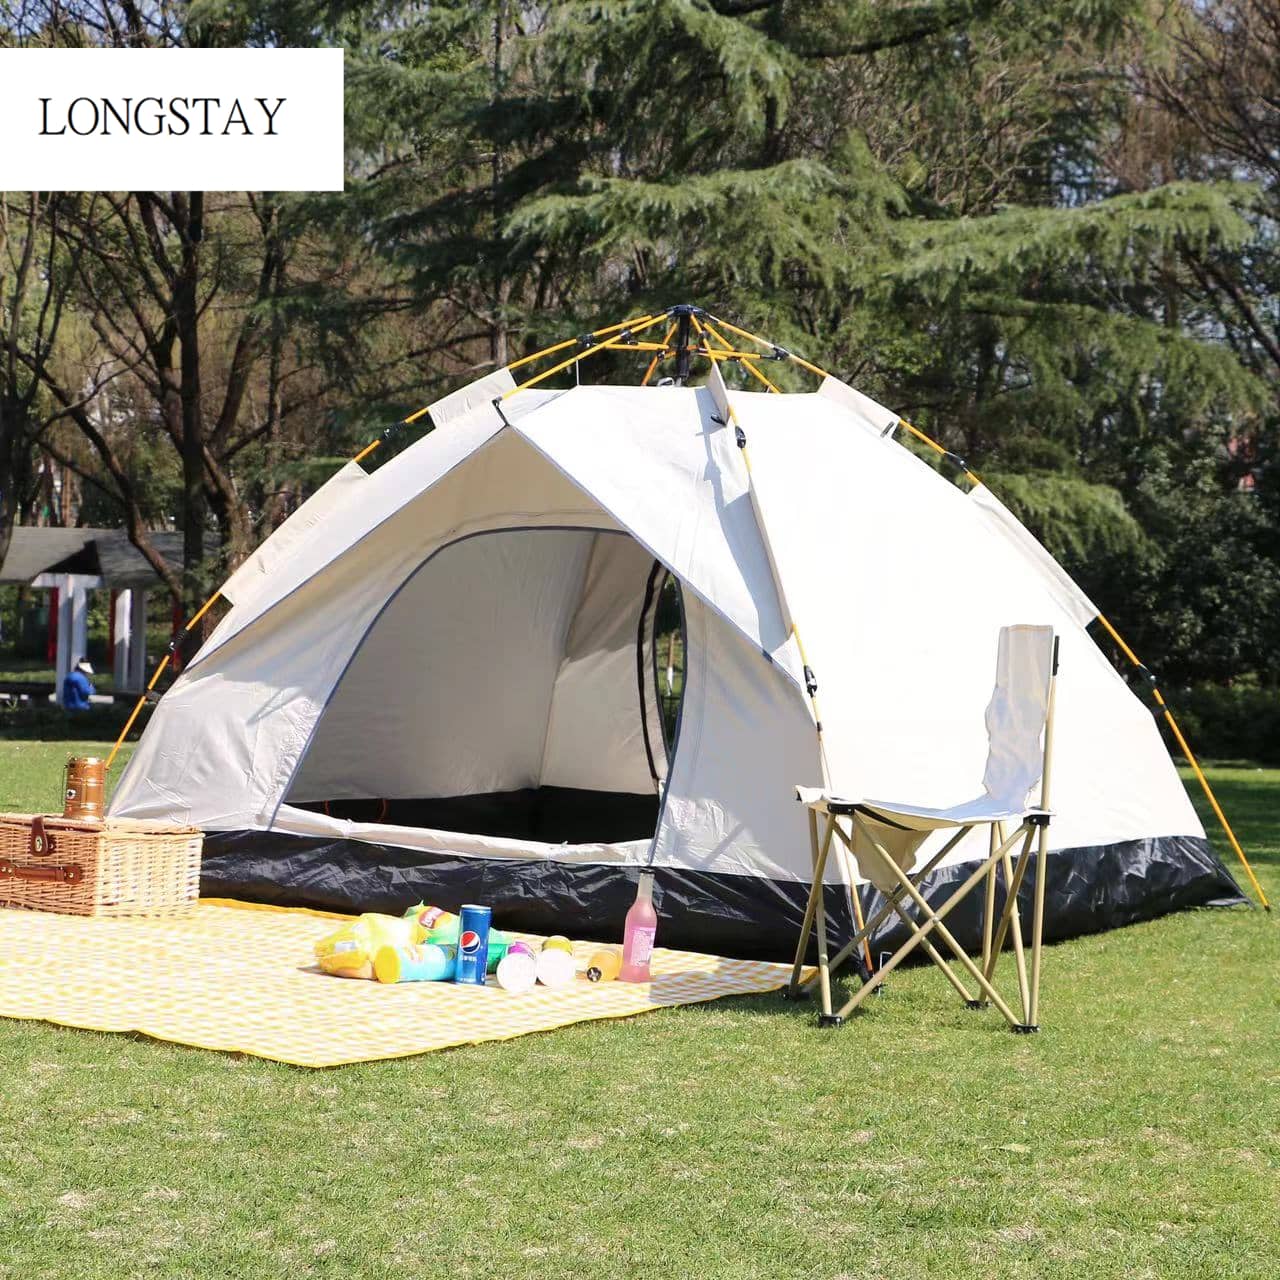 Four-Sided Tent - Your Gateway to Outdoor Comfort and Convenience! (15)